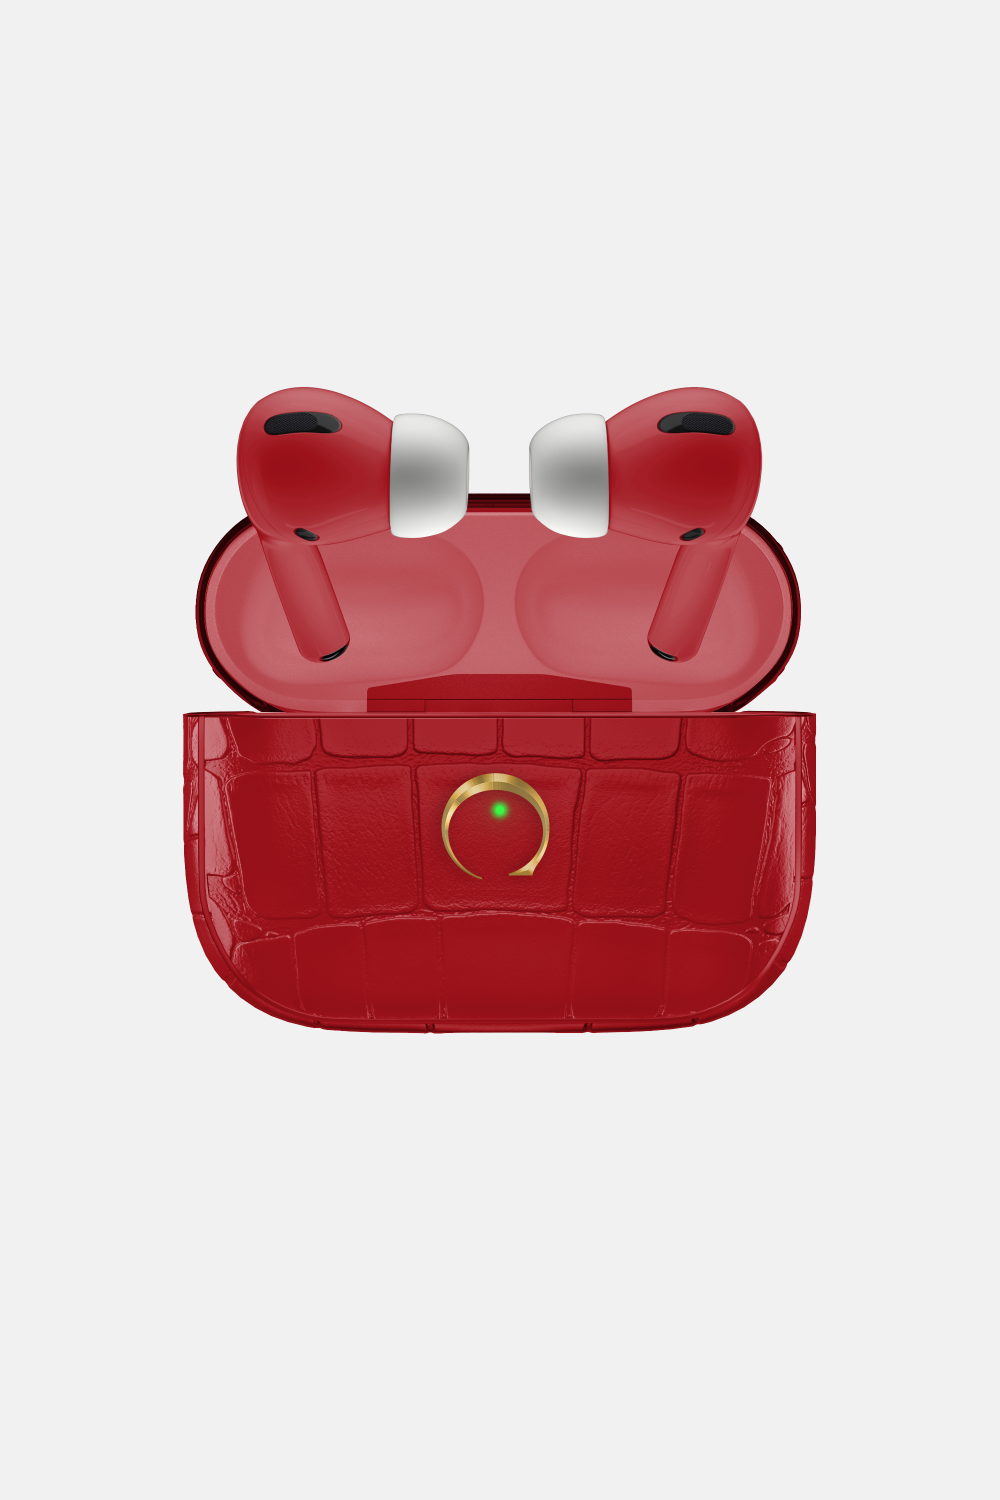 Alligator Airpods Pro 2nd Generation - Gold / Red - zollofrance